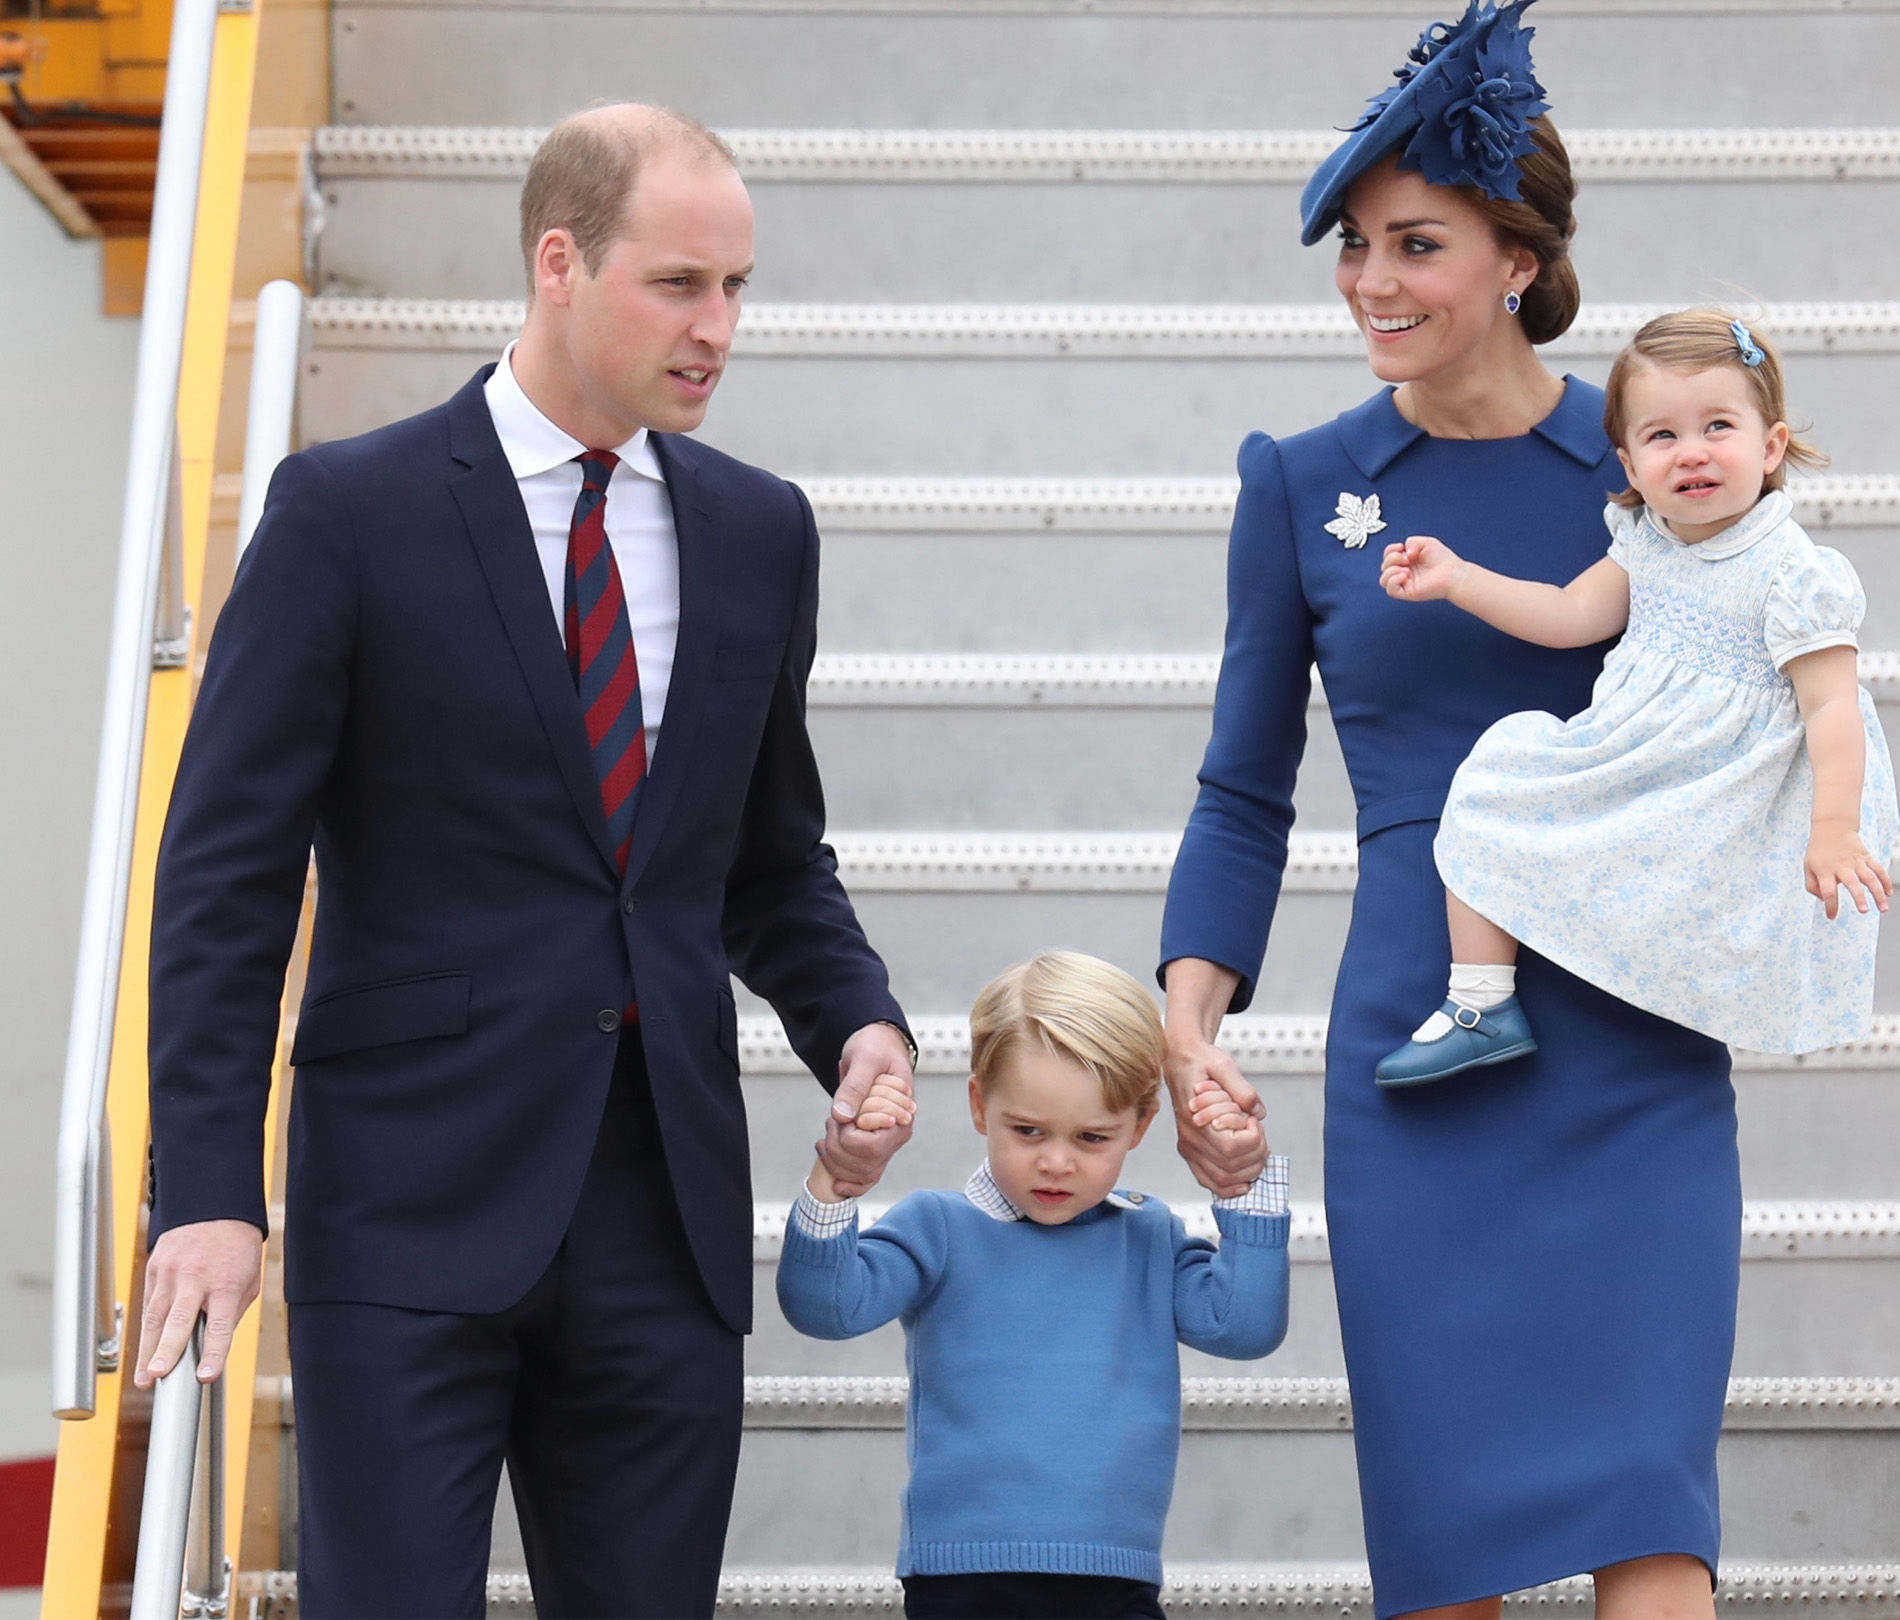 William and Kate arrive in Canada for Royal tour